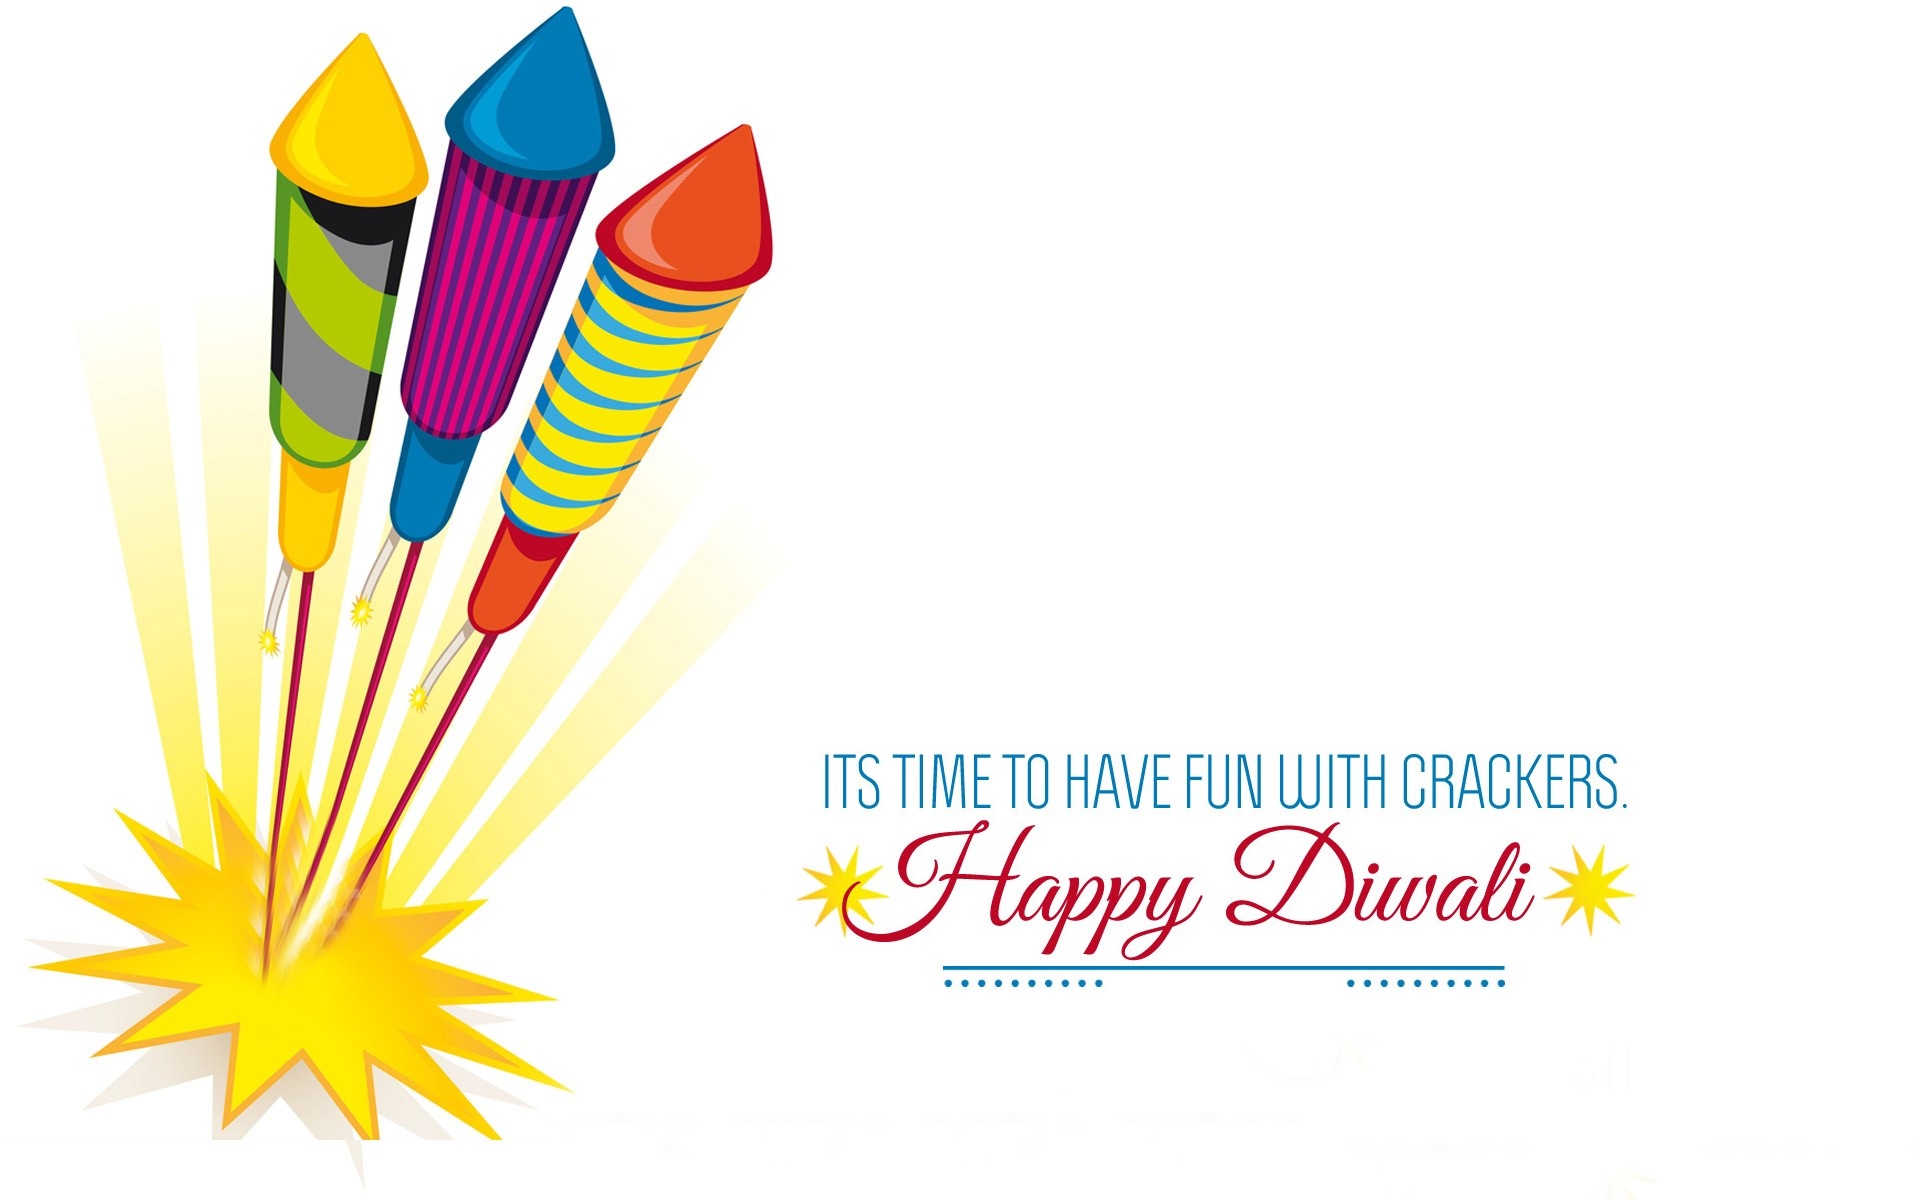 happy diwali greetings and crackers lets celebrate our diwali picture images